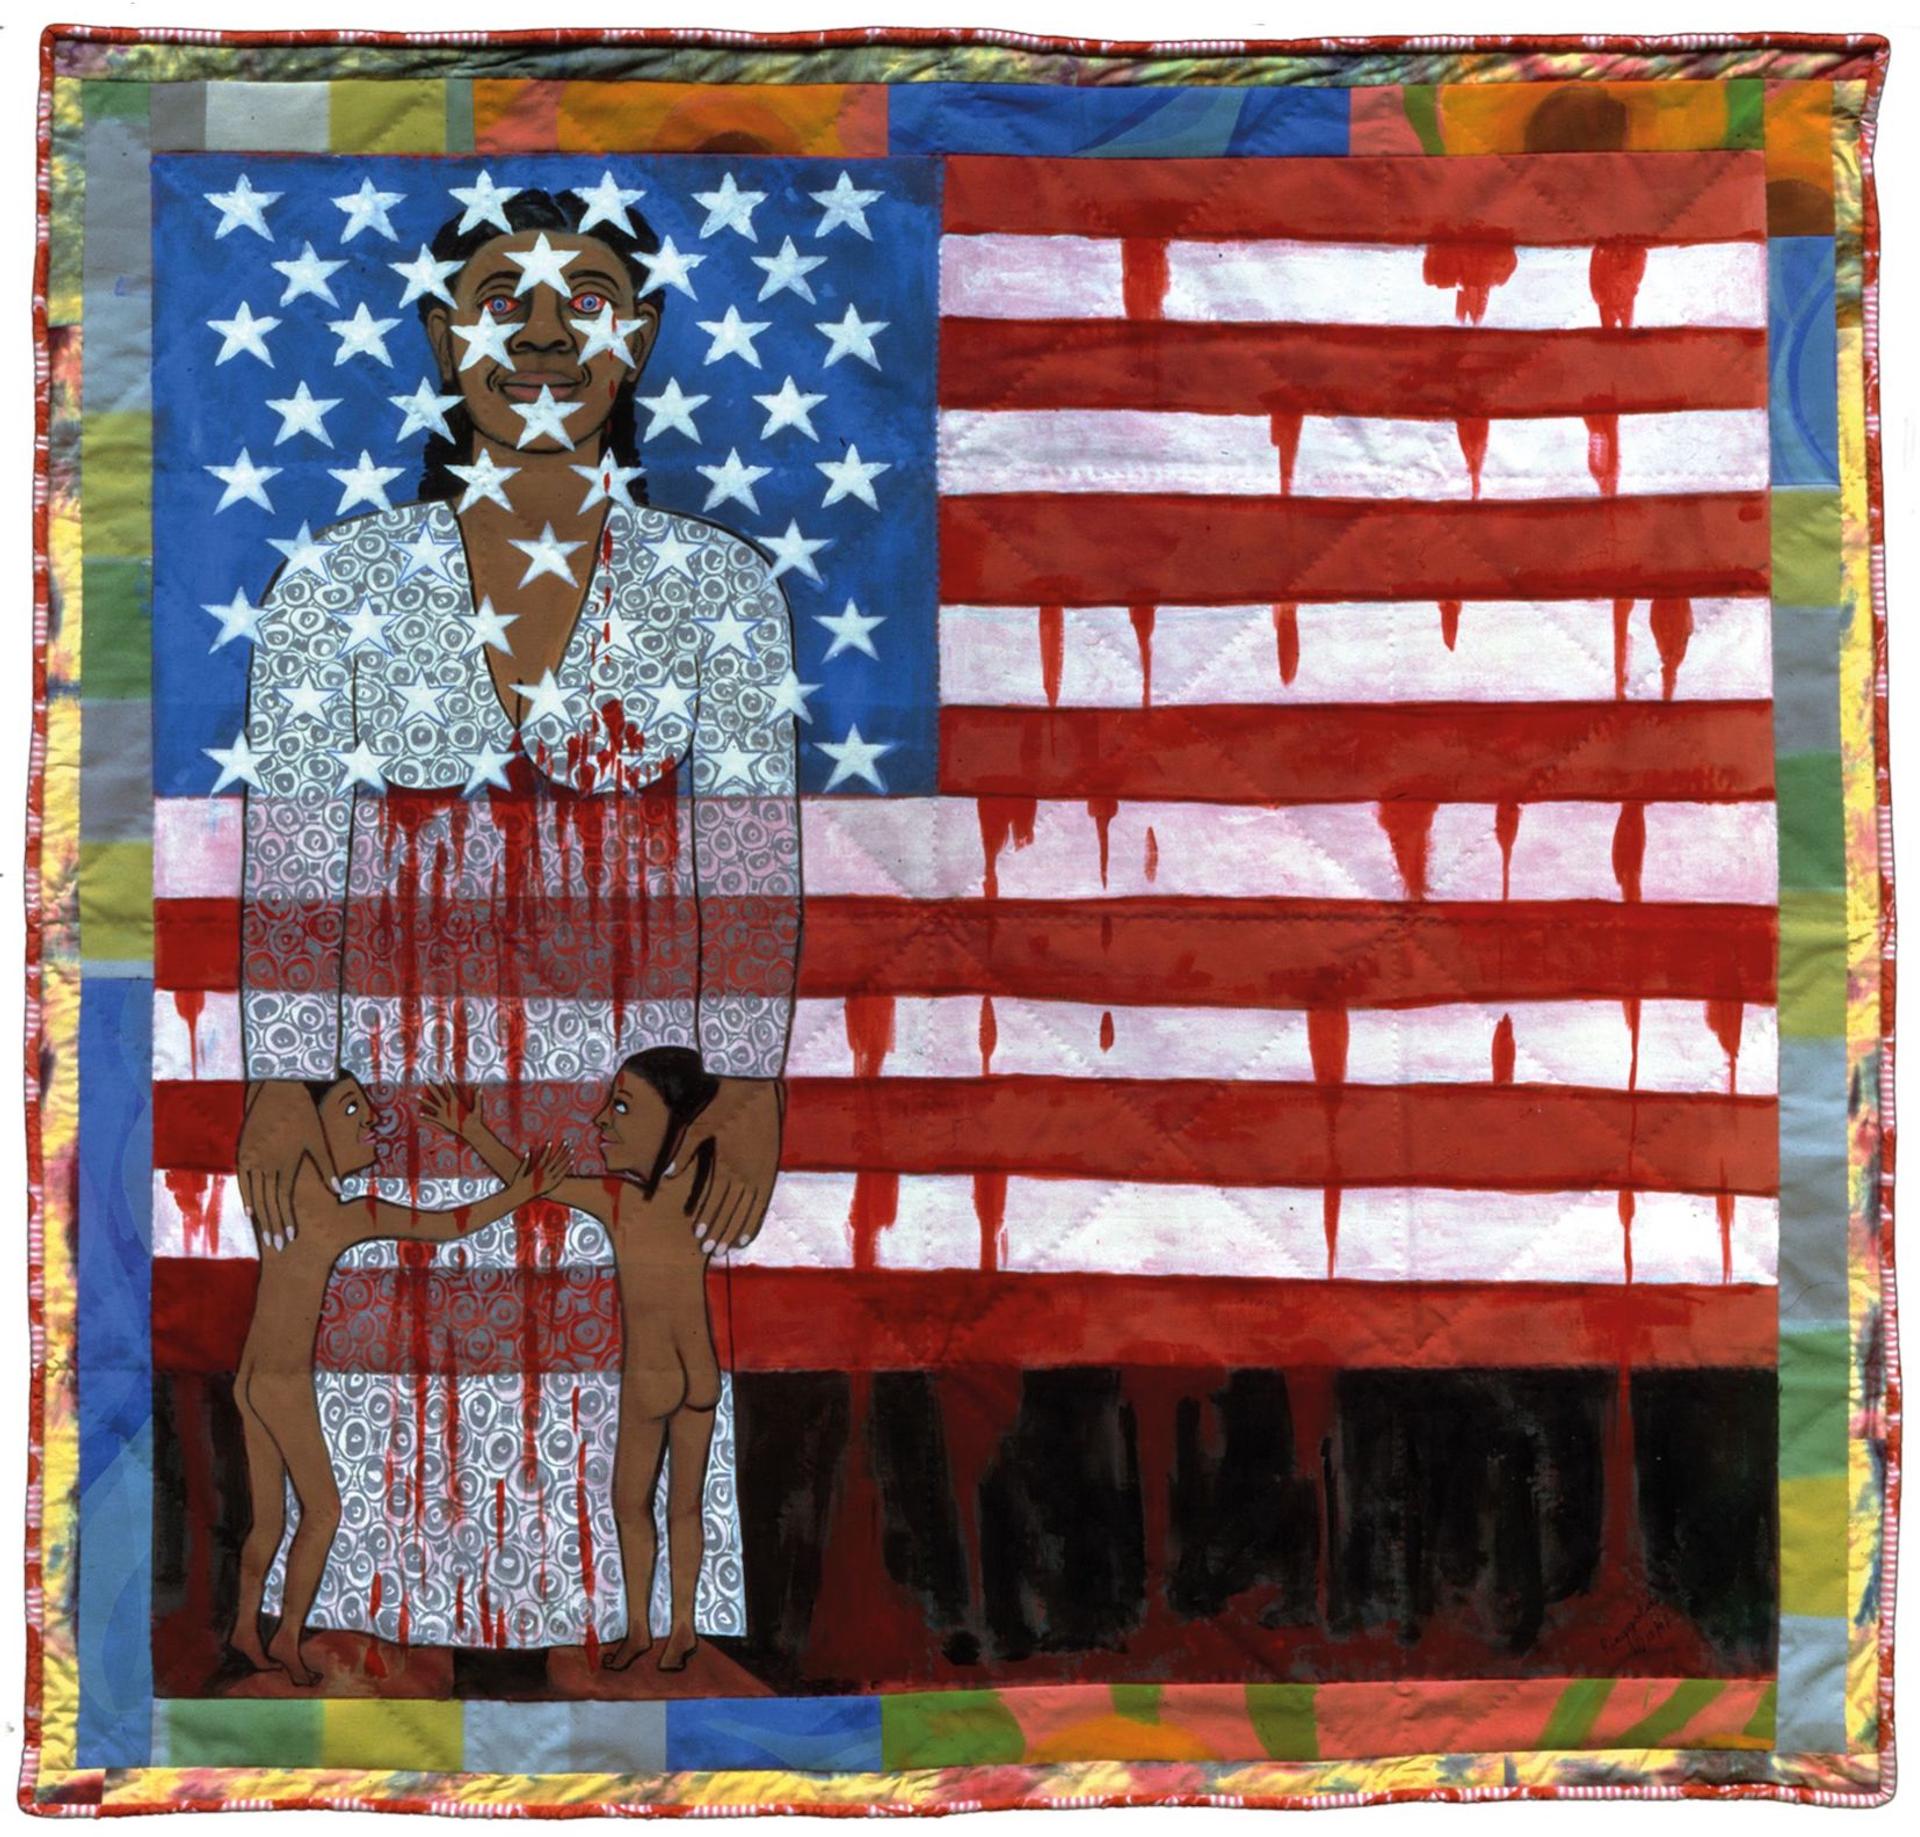 Faith Ringgold, The American Collection #6: The Flag Is Bleeding #2 (1997). Coutresy of Pippy Houldsworth Gallery, London.